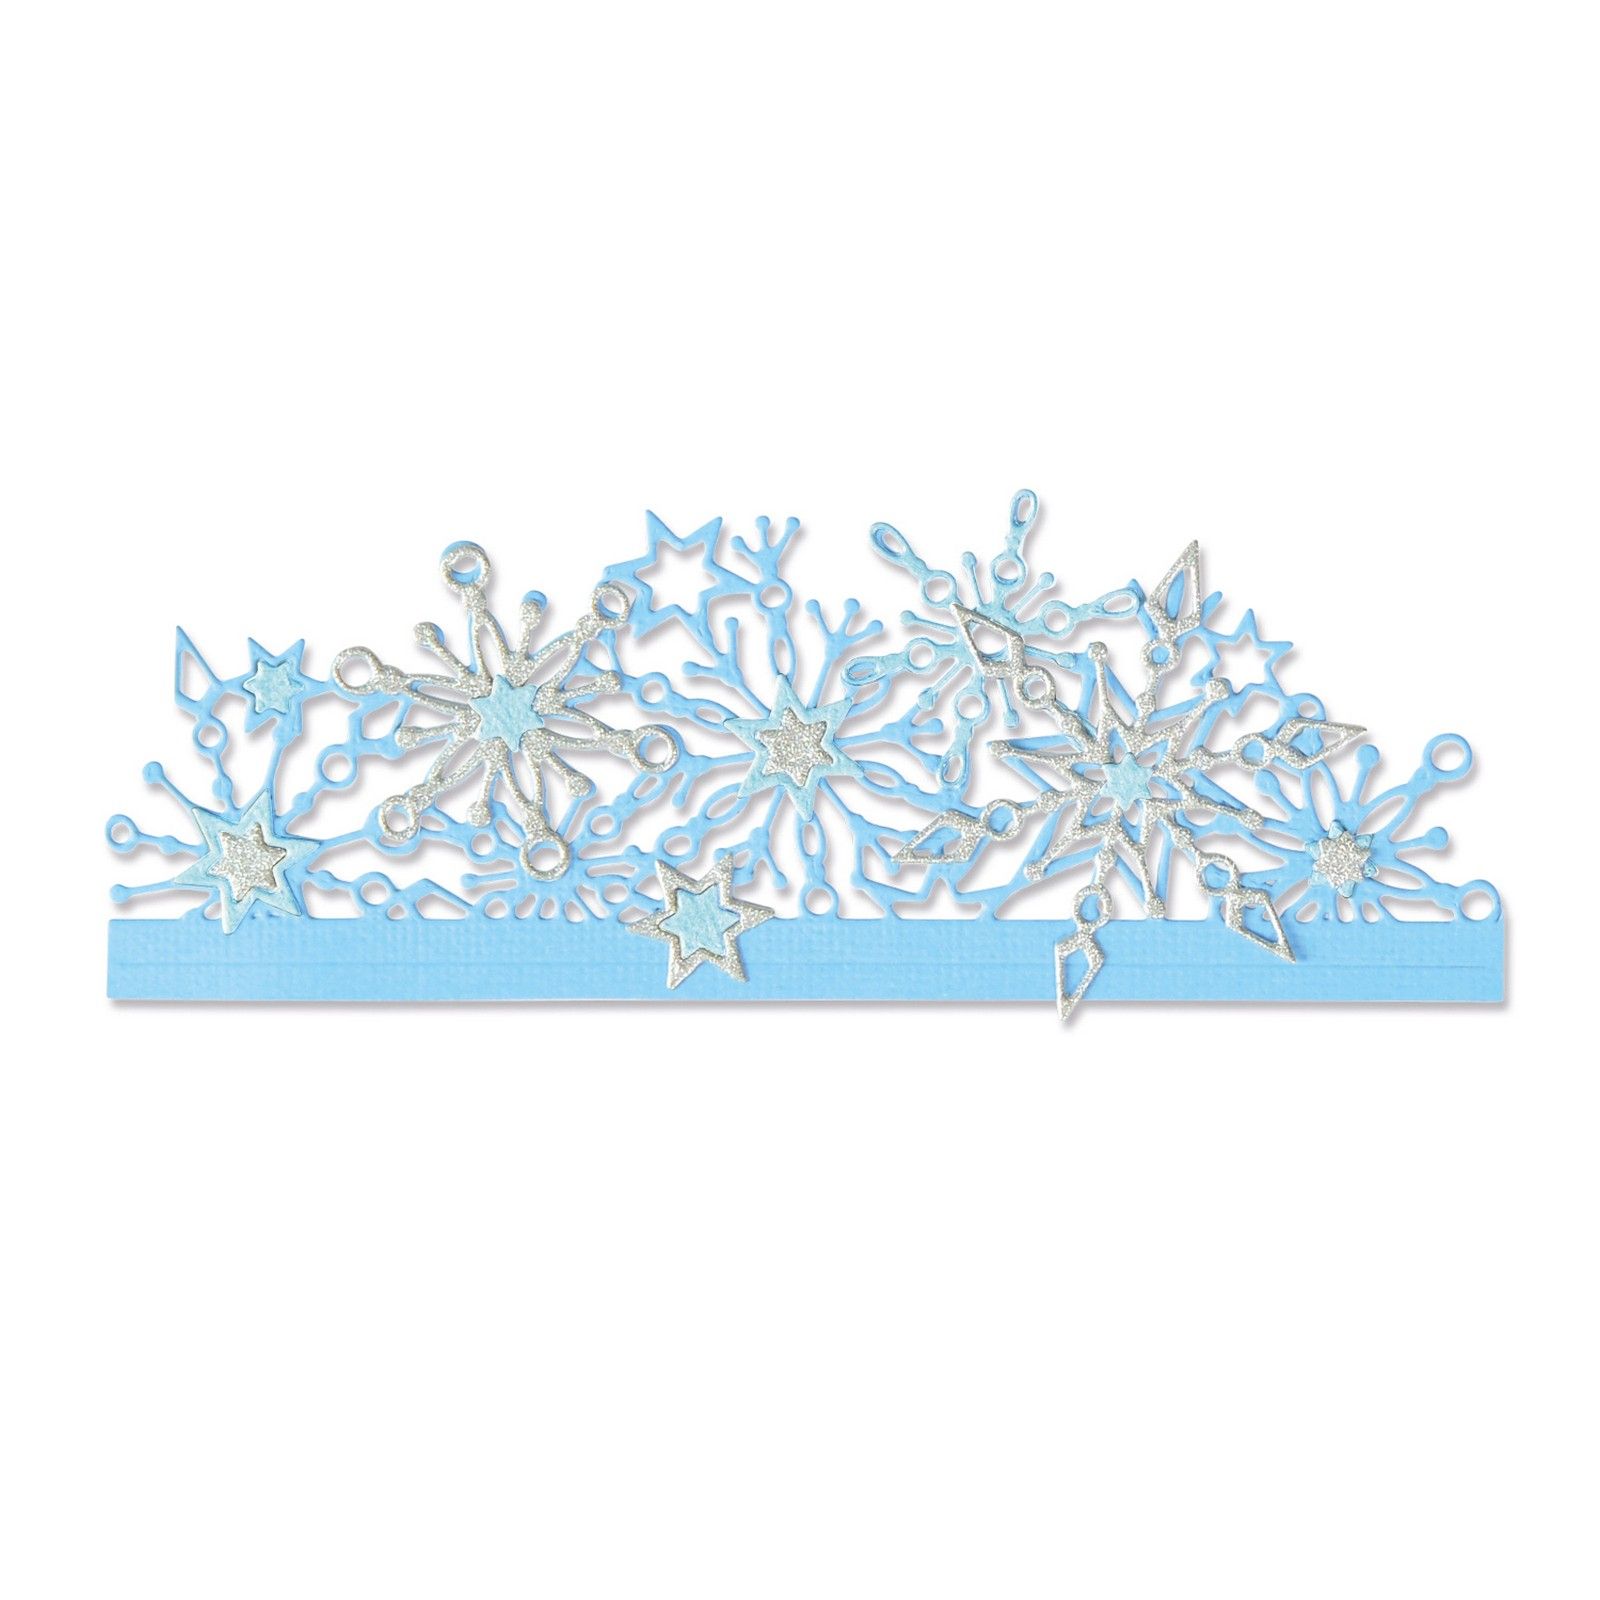 Sizzix Paper Punch - Snowflake, Large